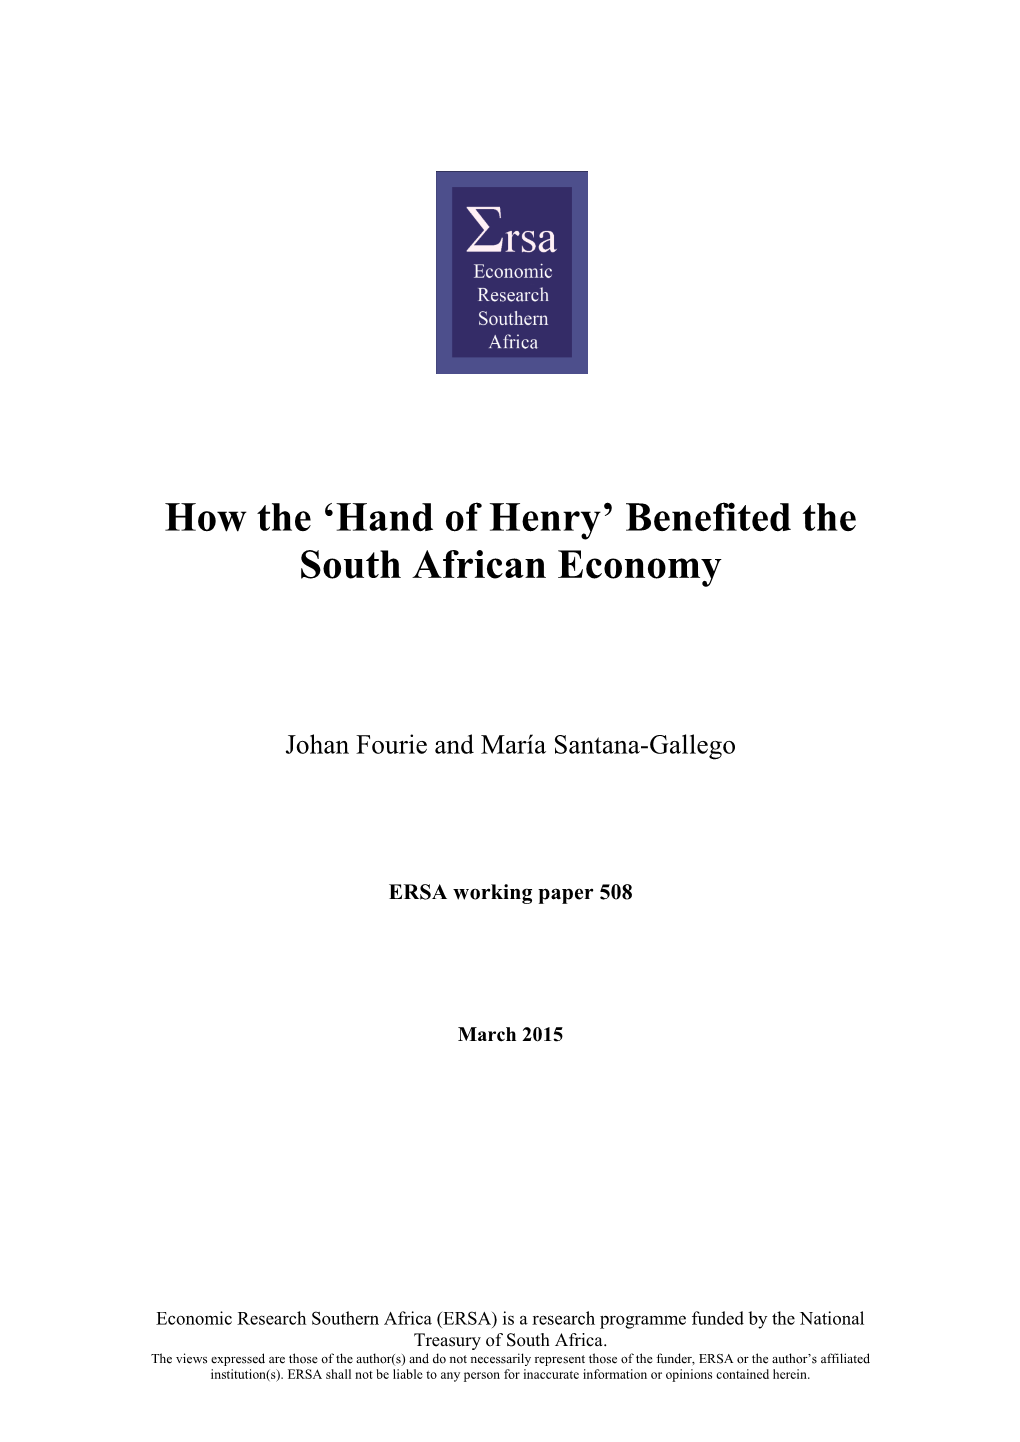 How the 'Hand of Henry' Benefited the South African Economy